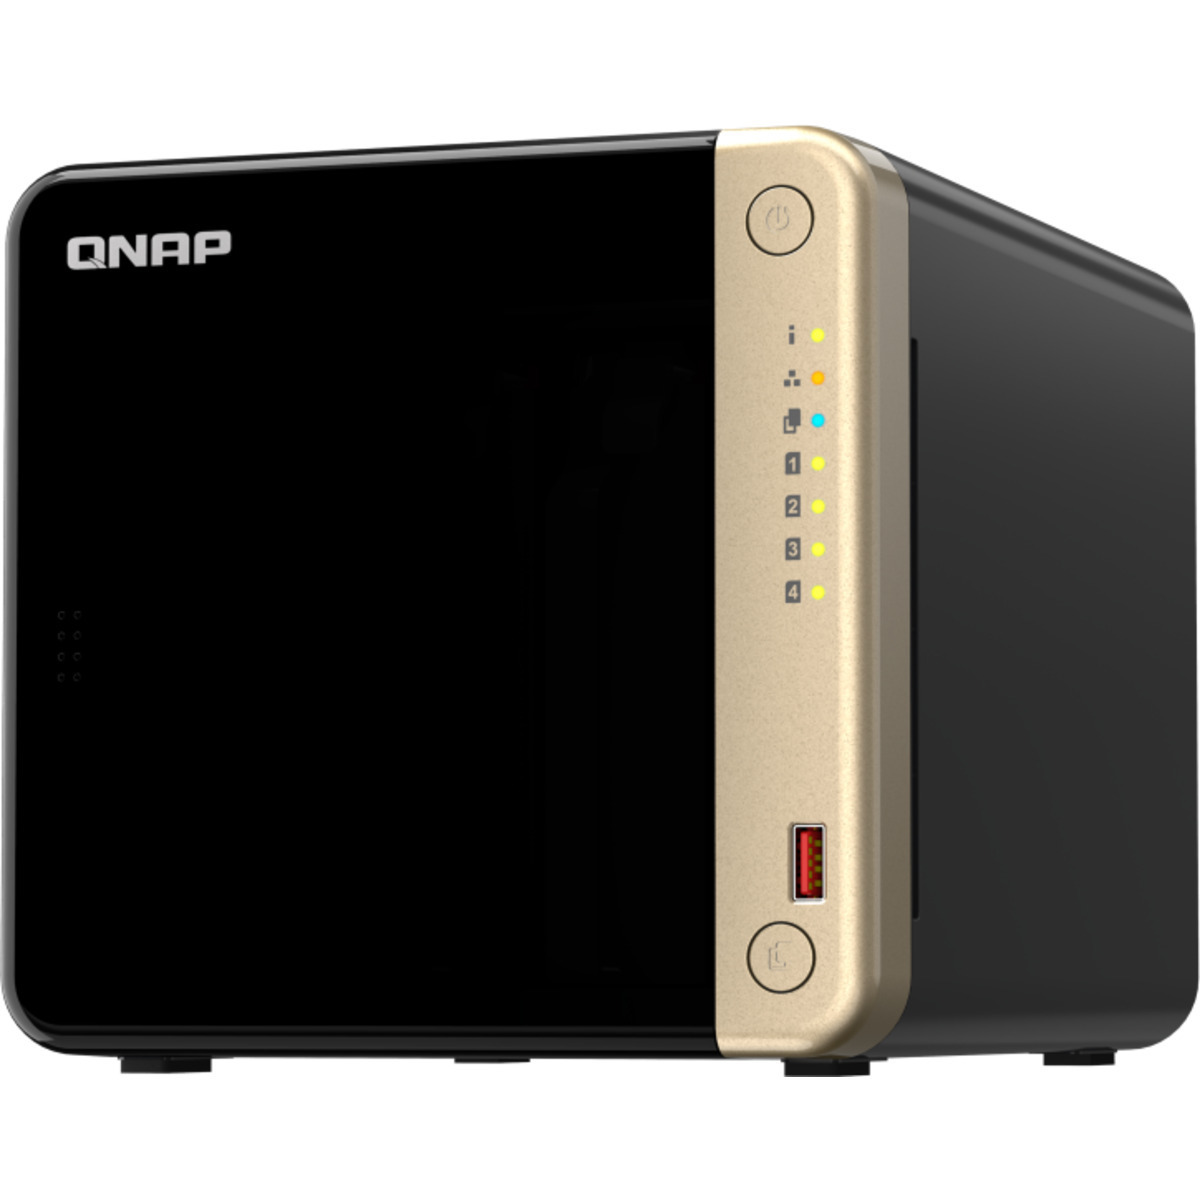 buy $2610 QNAP TS-464 80tb Desktop NAS - Network Attached Storage Device 4x20000gb Western Digital Red Pro WD201KFGX 3.5 7200rpm SATA 6Gb/s HDD NAS Class Drives Installed - Burn-In Tested - FREE RAM UPGRADE - nas headquarters buy network attached storage server device das new raid-5 free shipping simply usa TS-464